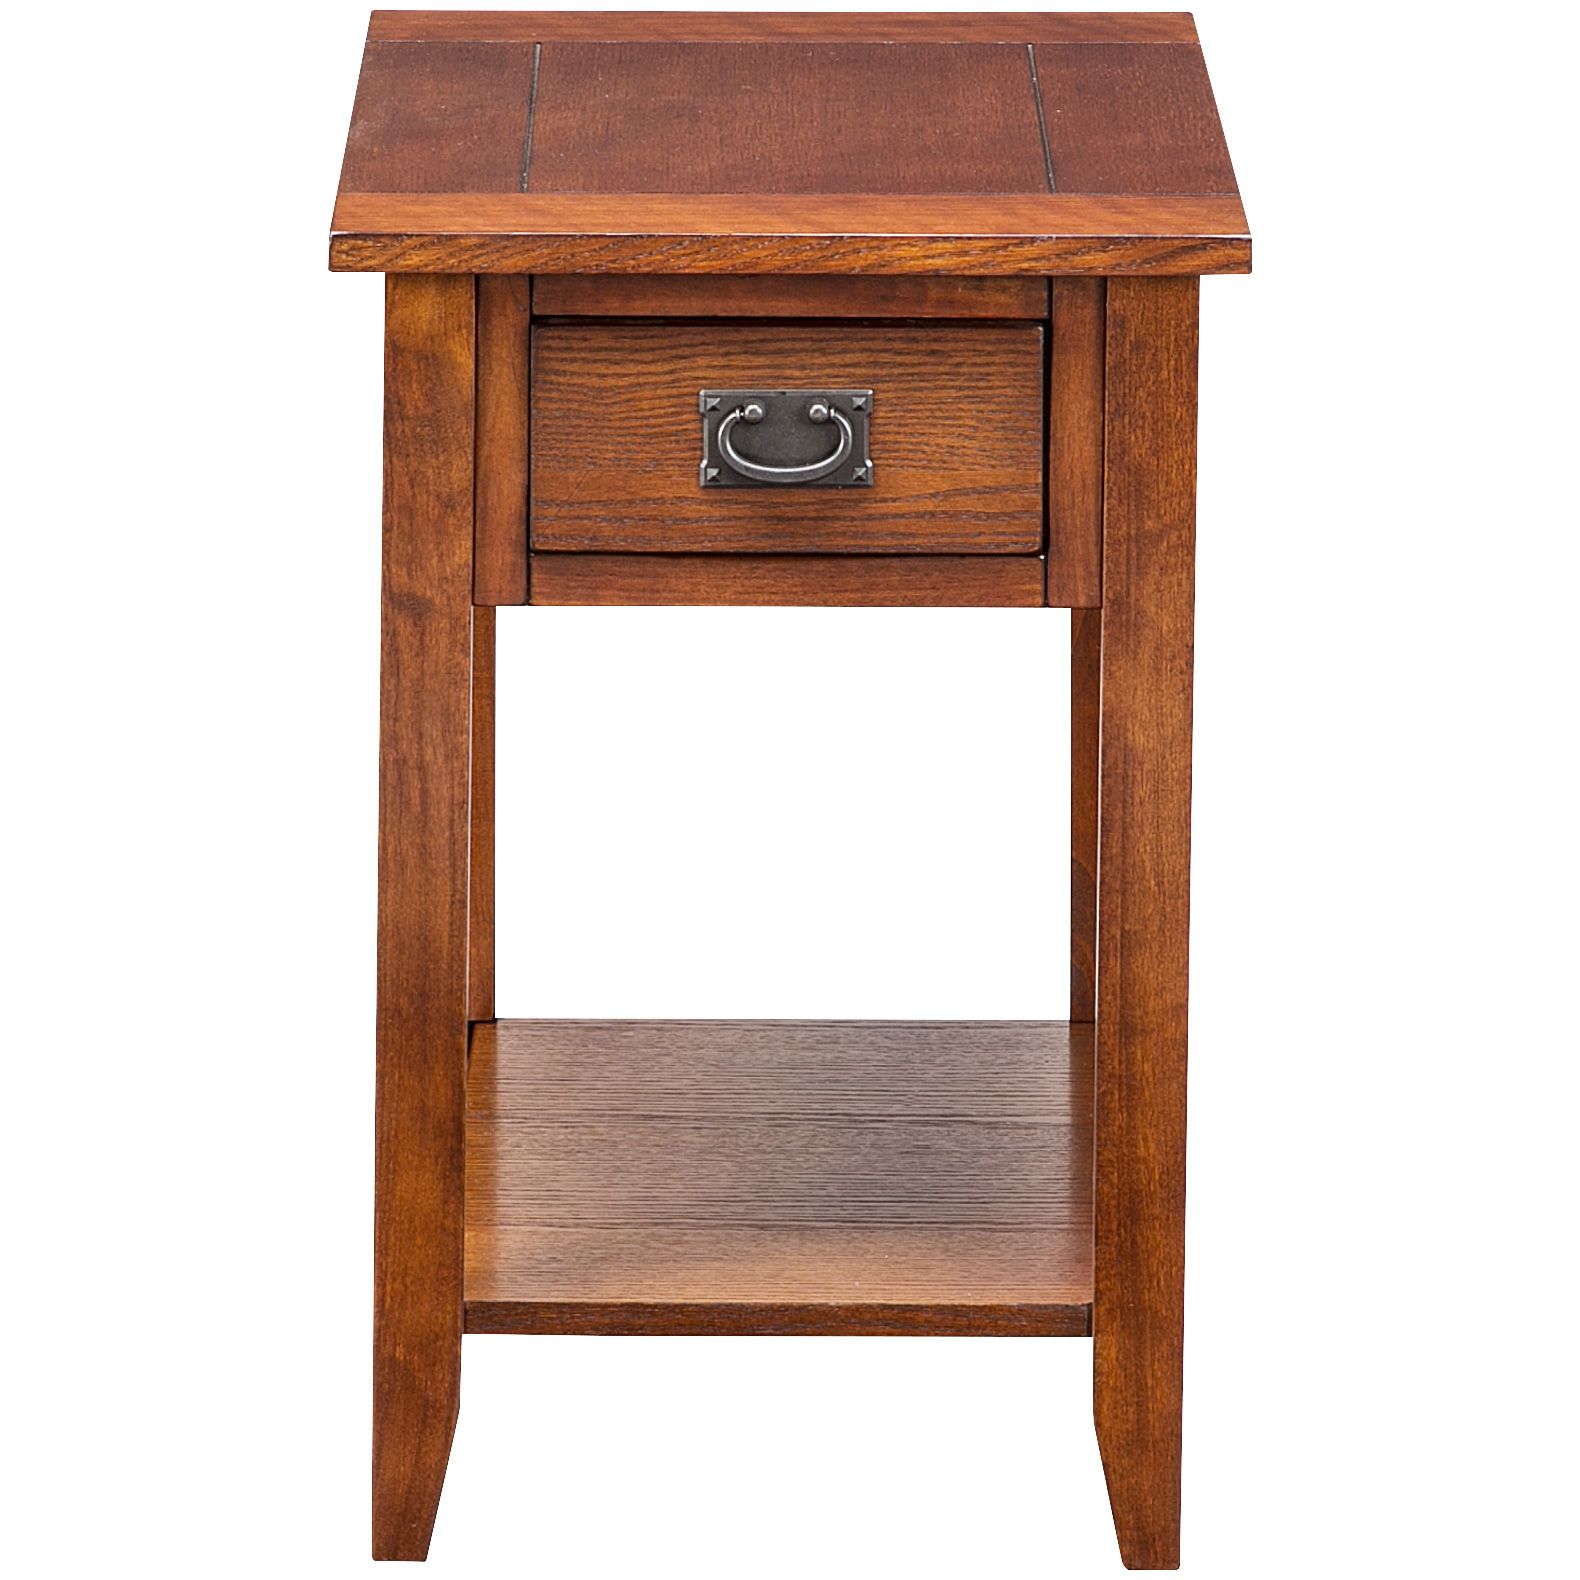 Rutledge Mission Oak Chairside Table | Slumberland Furniture With Regard To Rutledge Sideboards (View 25 of 30)